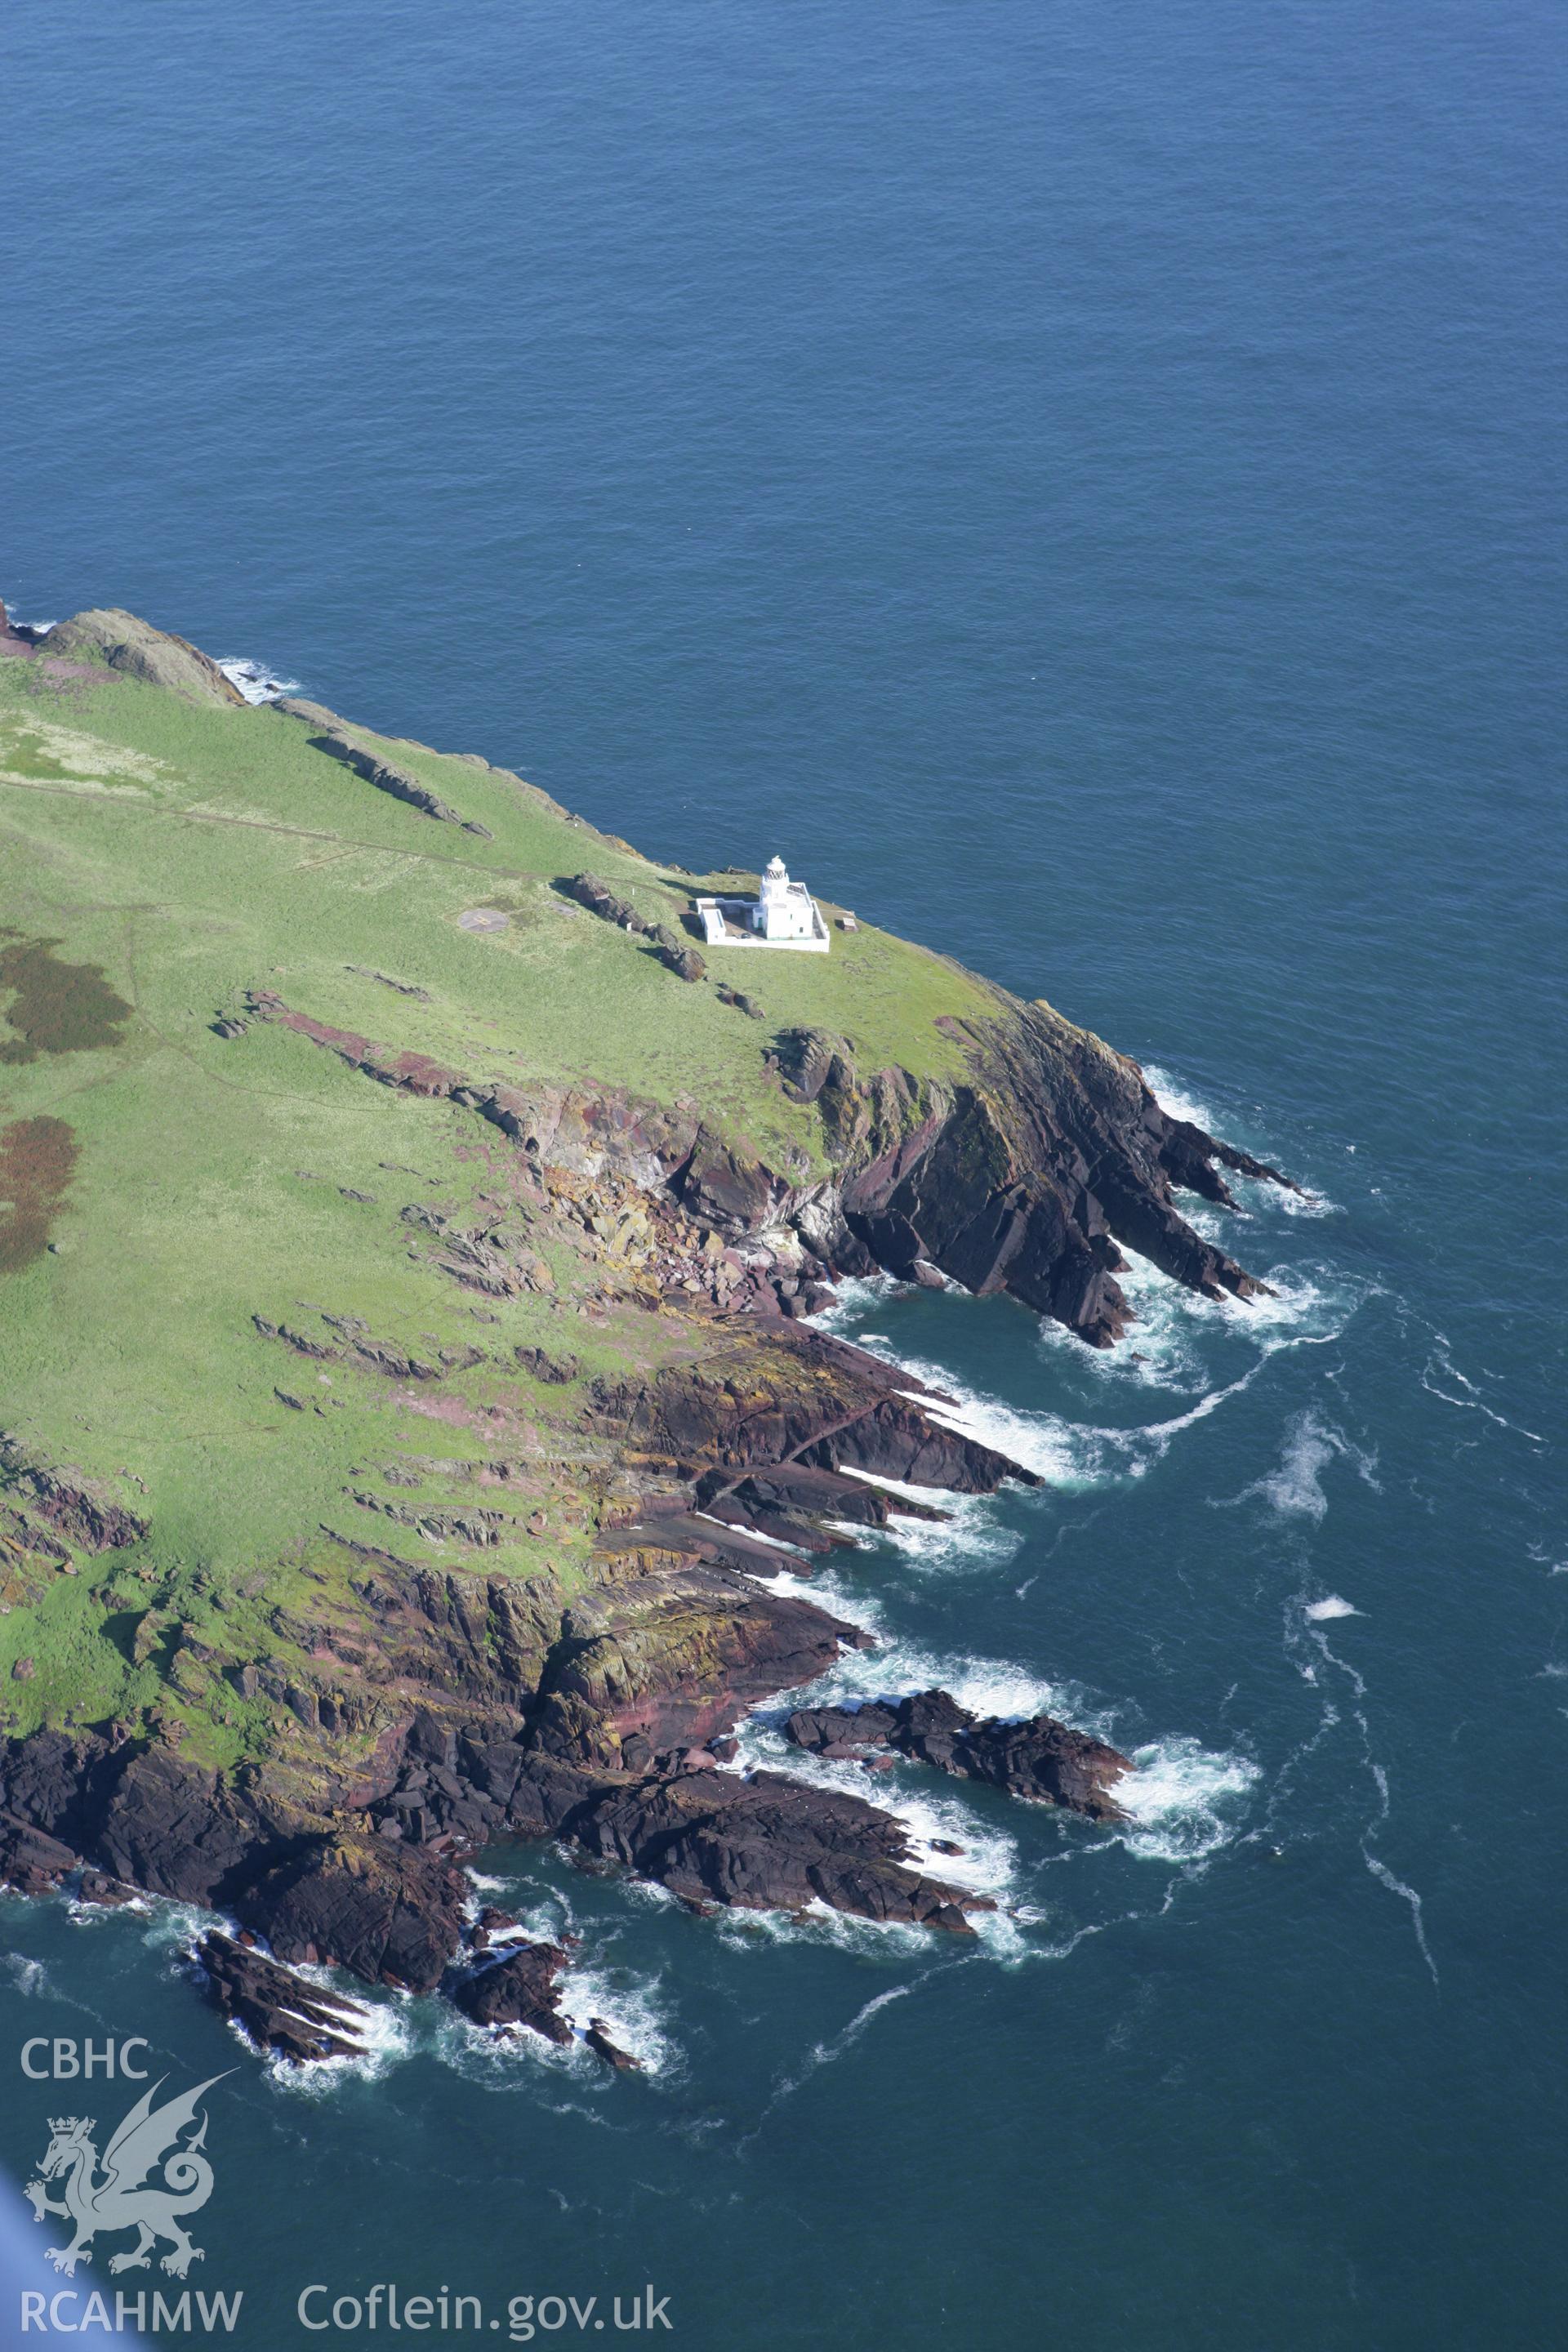 RCAHMW colour oblique aerial photograph of Skokholm Island. Taken on 30 July 2007 by Toby Driver